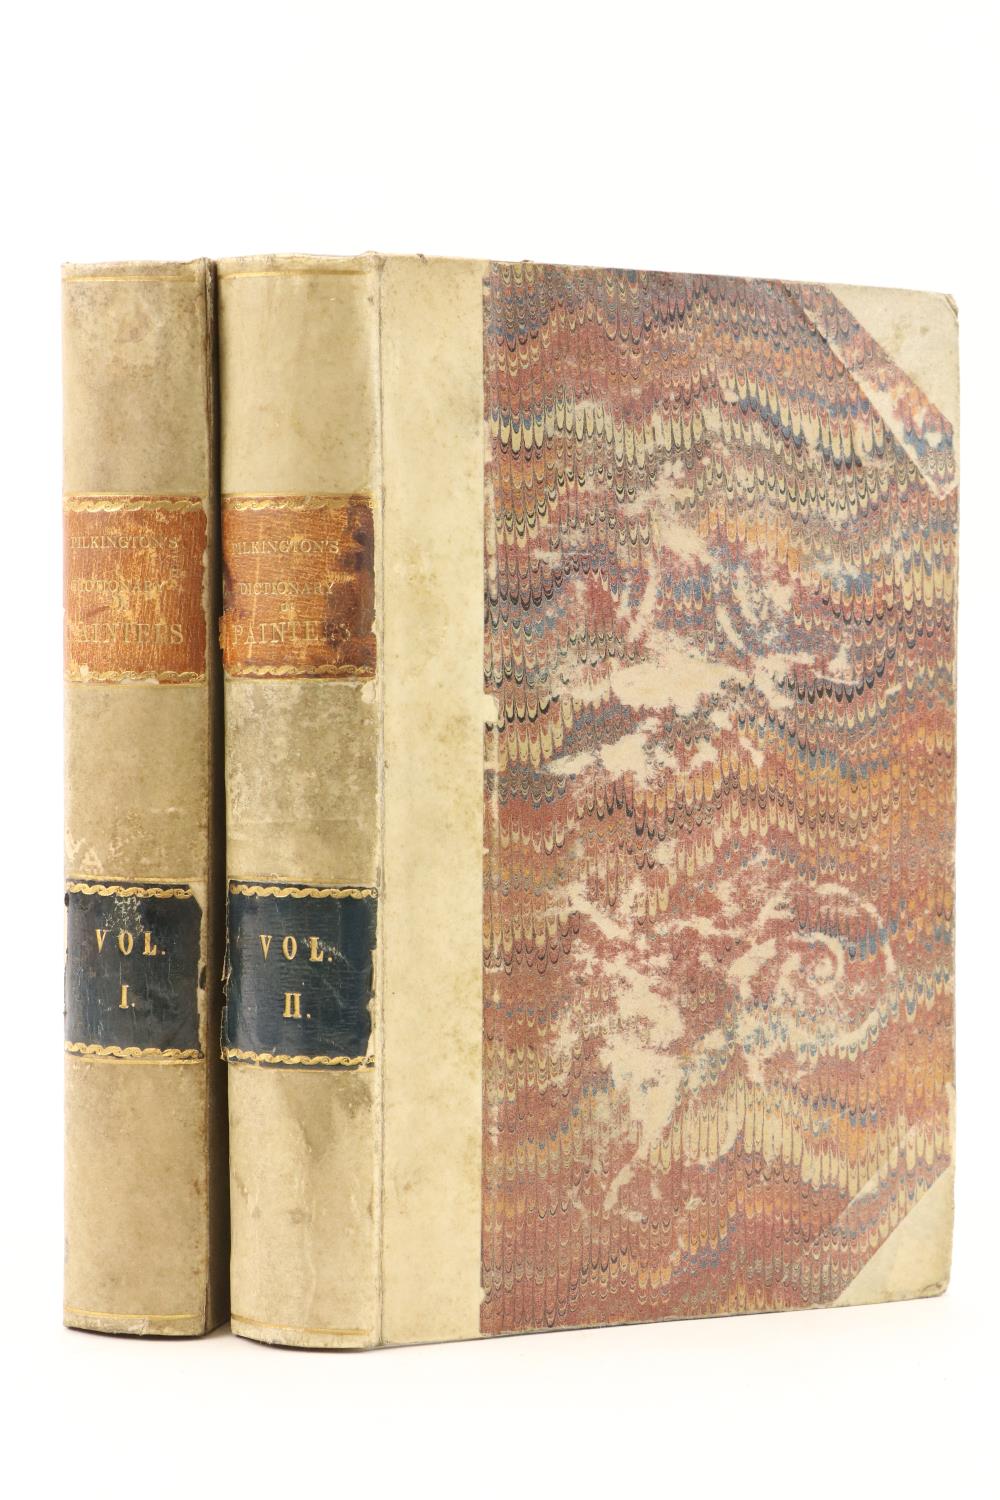 Pilkington (Matthew) A General Dictionary of Painters, 2 vols. 8vo Lond. 1829. New Edn., cont. hf.